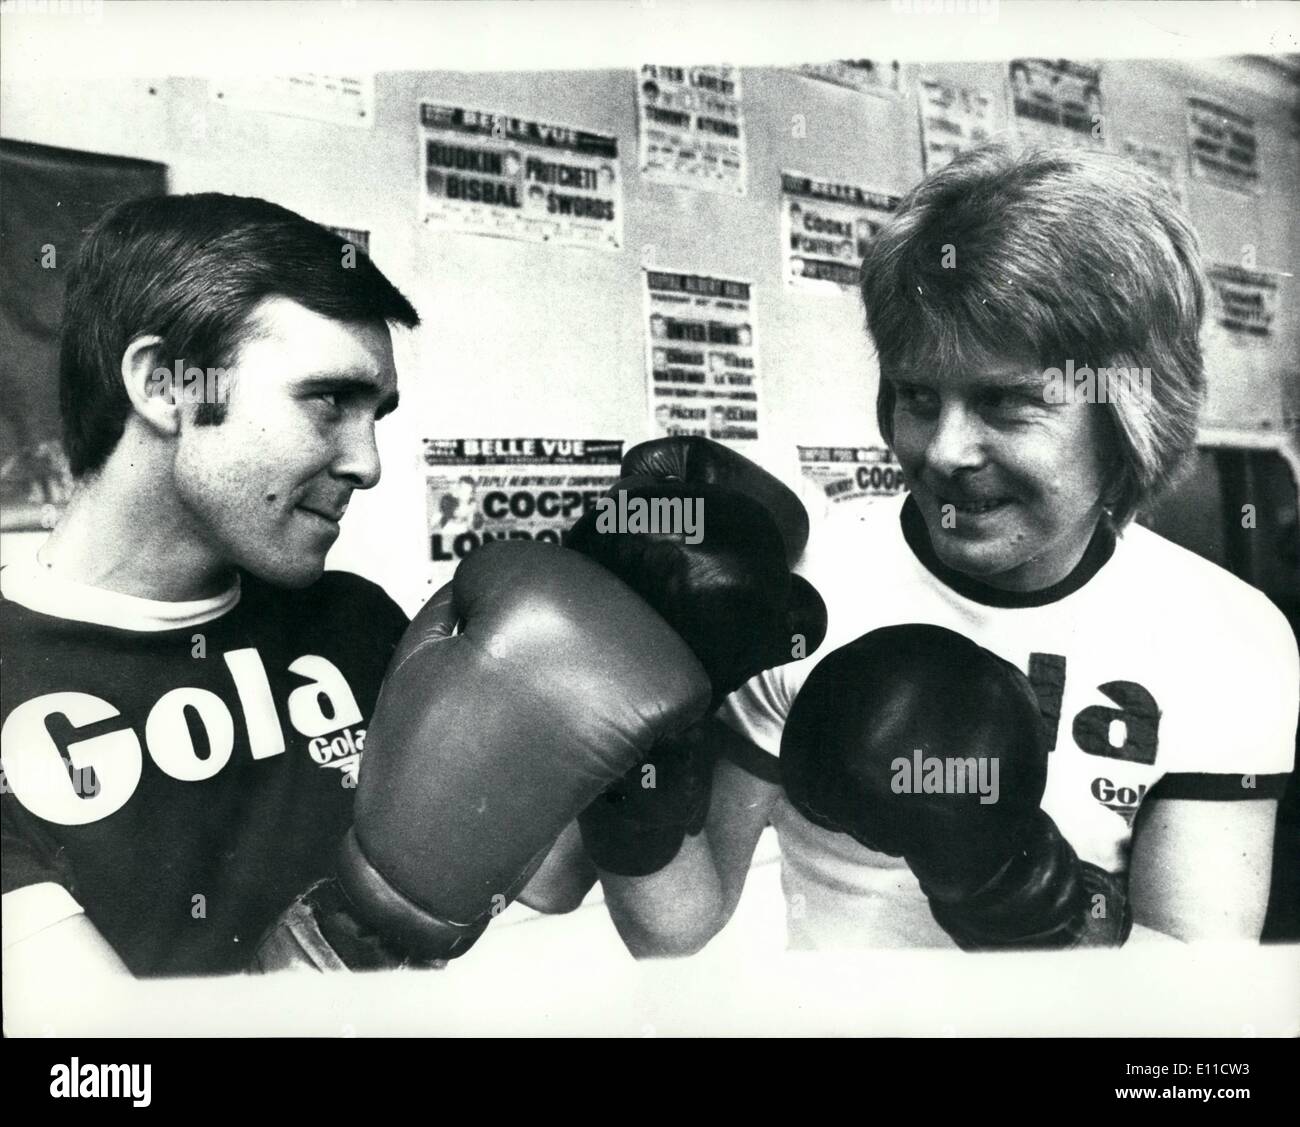 Mar. 03, 1977 - John H. Strachey Gets Ready For His Title Fight With The Help Of Singer Joe Brown: John H. Strachey the former world walterweight champion now in training for his fight against British Champion Dave ''Bot'' Green at Wembley next tuesday, was hard at it at the Royal Oak Gymn Canning Town today with the help of singer Joe Brown who has just released his latest single called ''The Boxer''. Photo shows John H. Strachey left, and Joe Brown shape-up in the gymn during Joe's visit to watch him train. Stock Photo